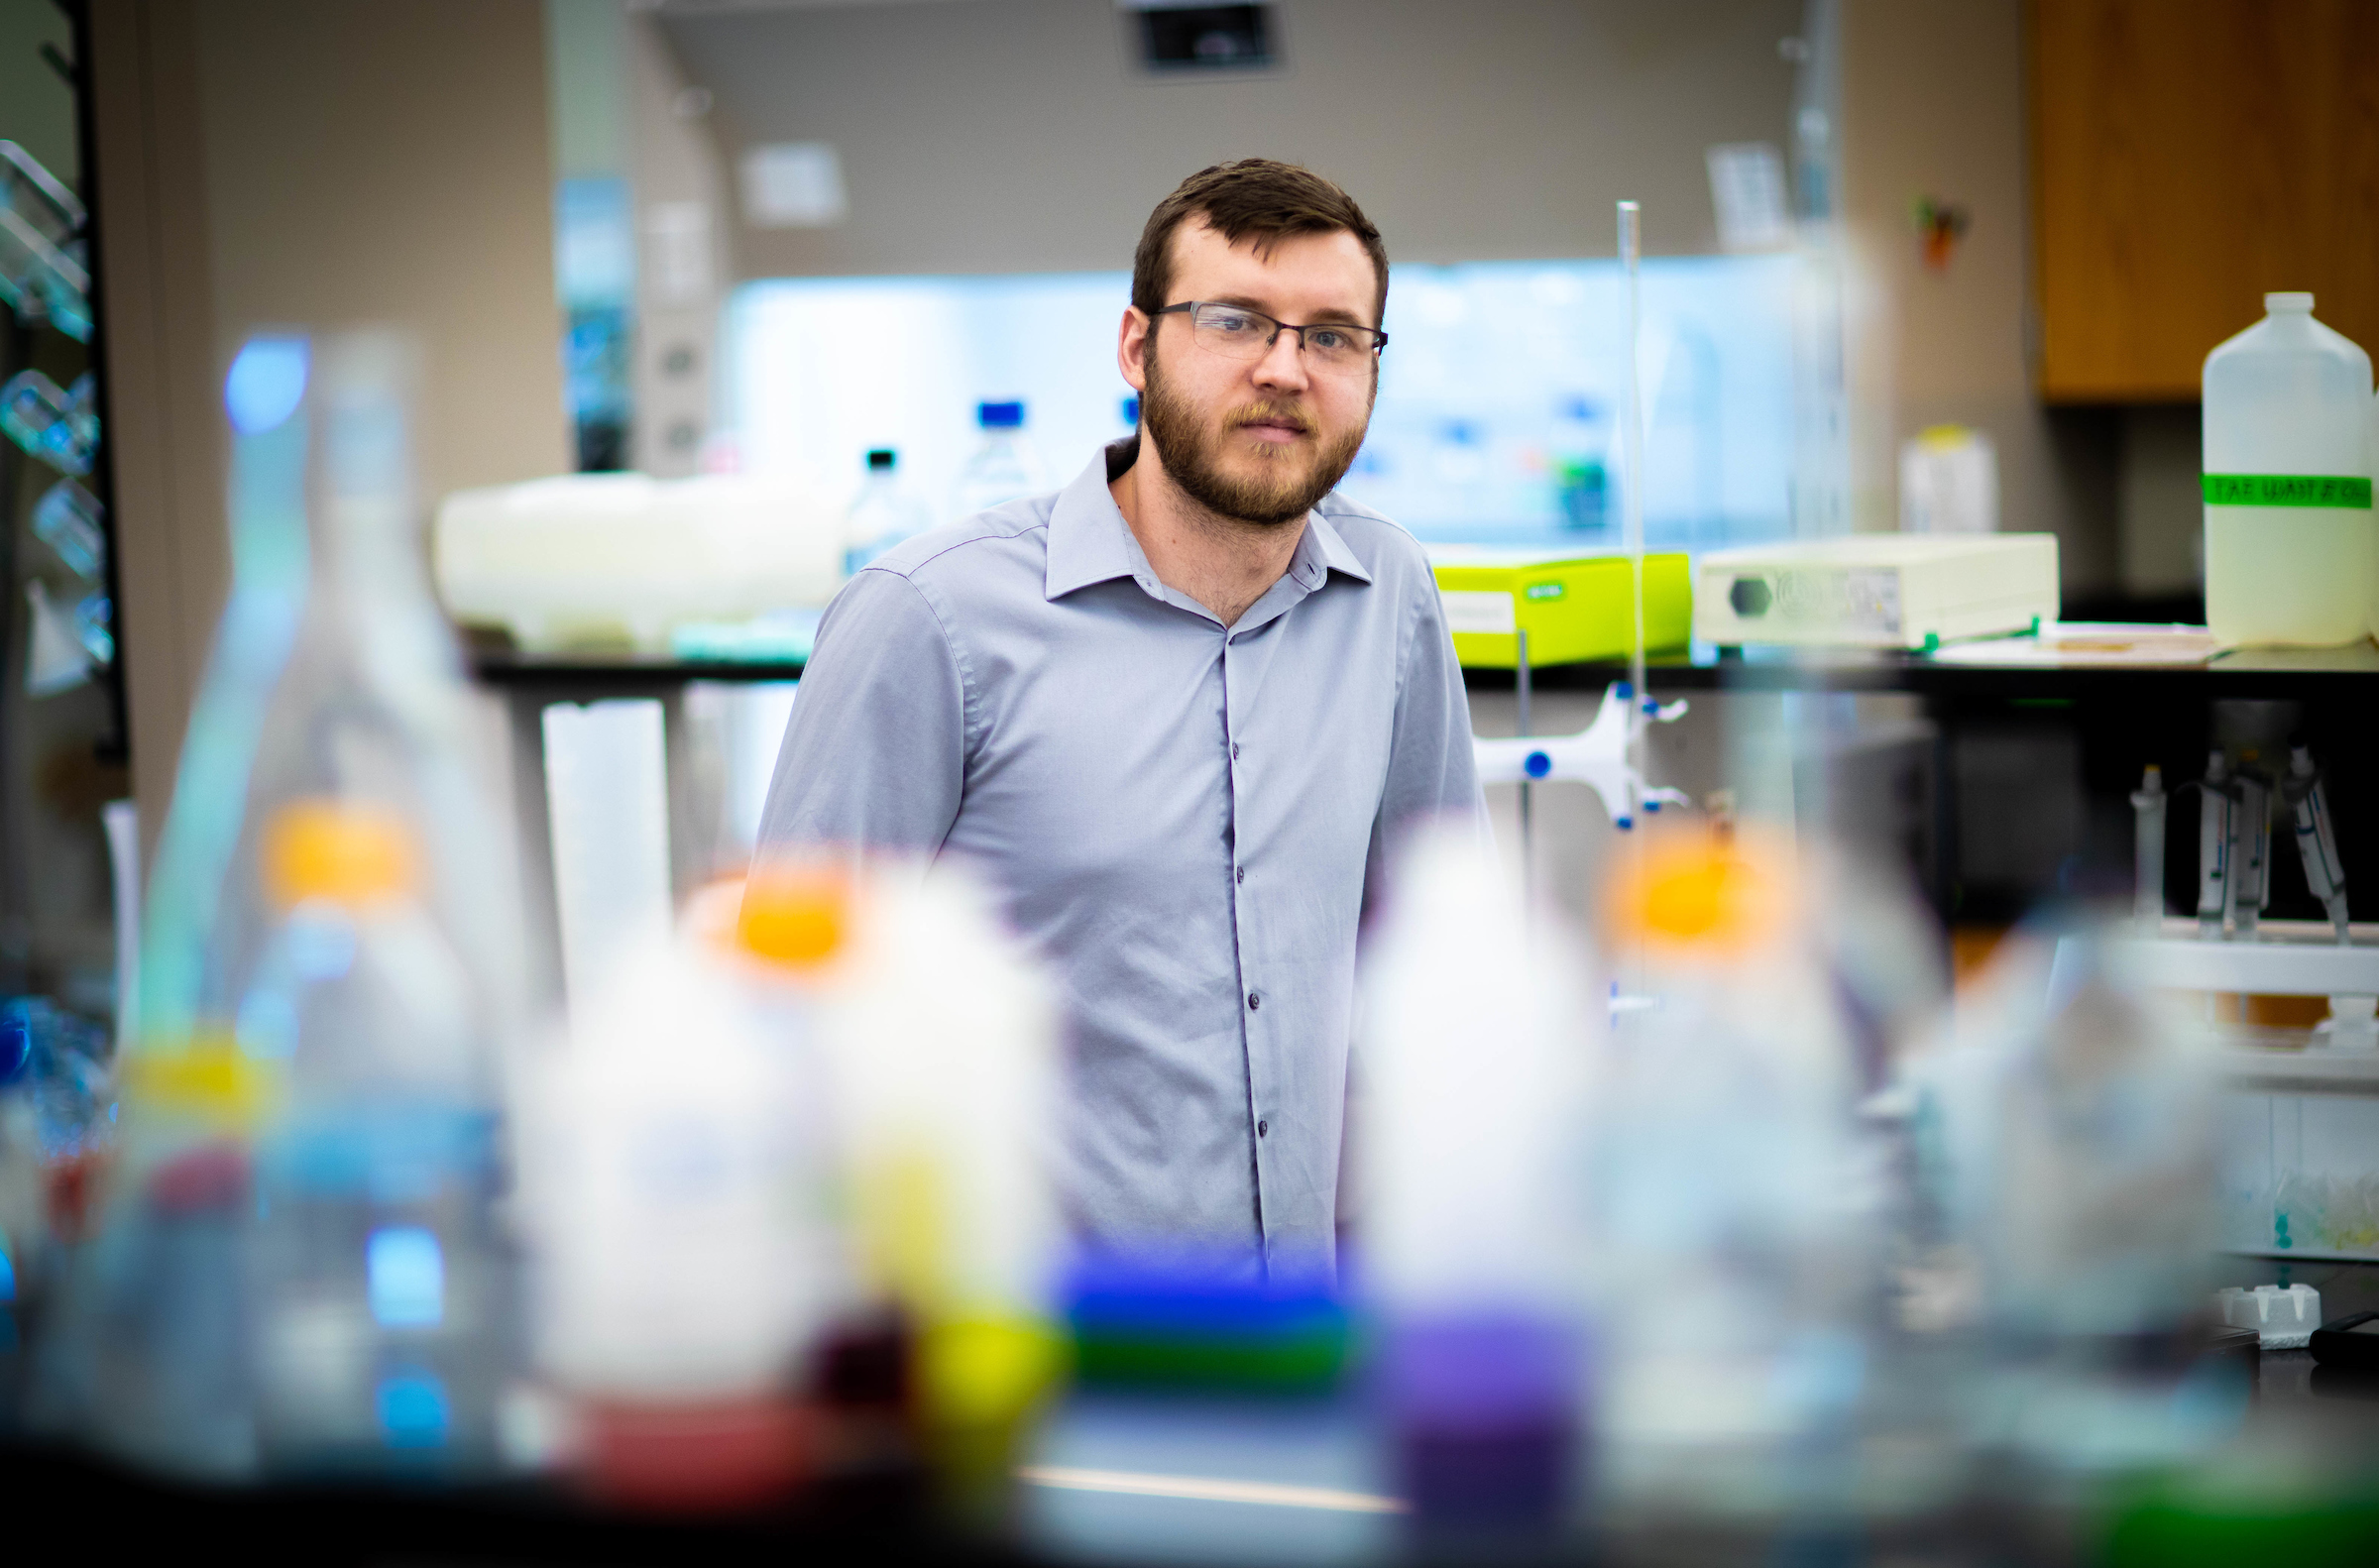 Santa Fe College graduate Clay Abraham photographed in a lab at the Perry Center for emerging technologies